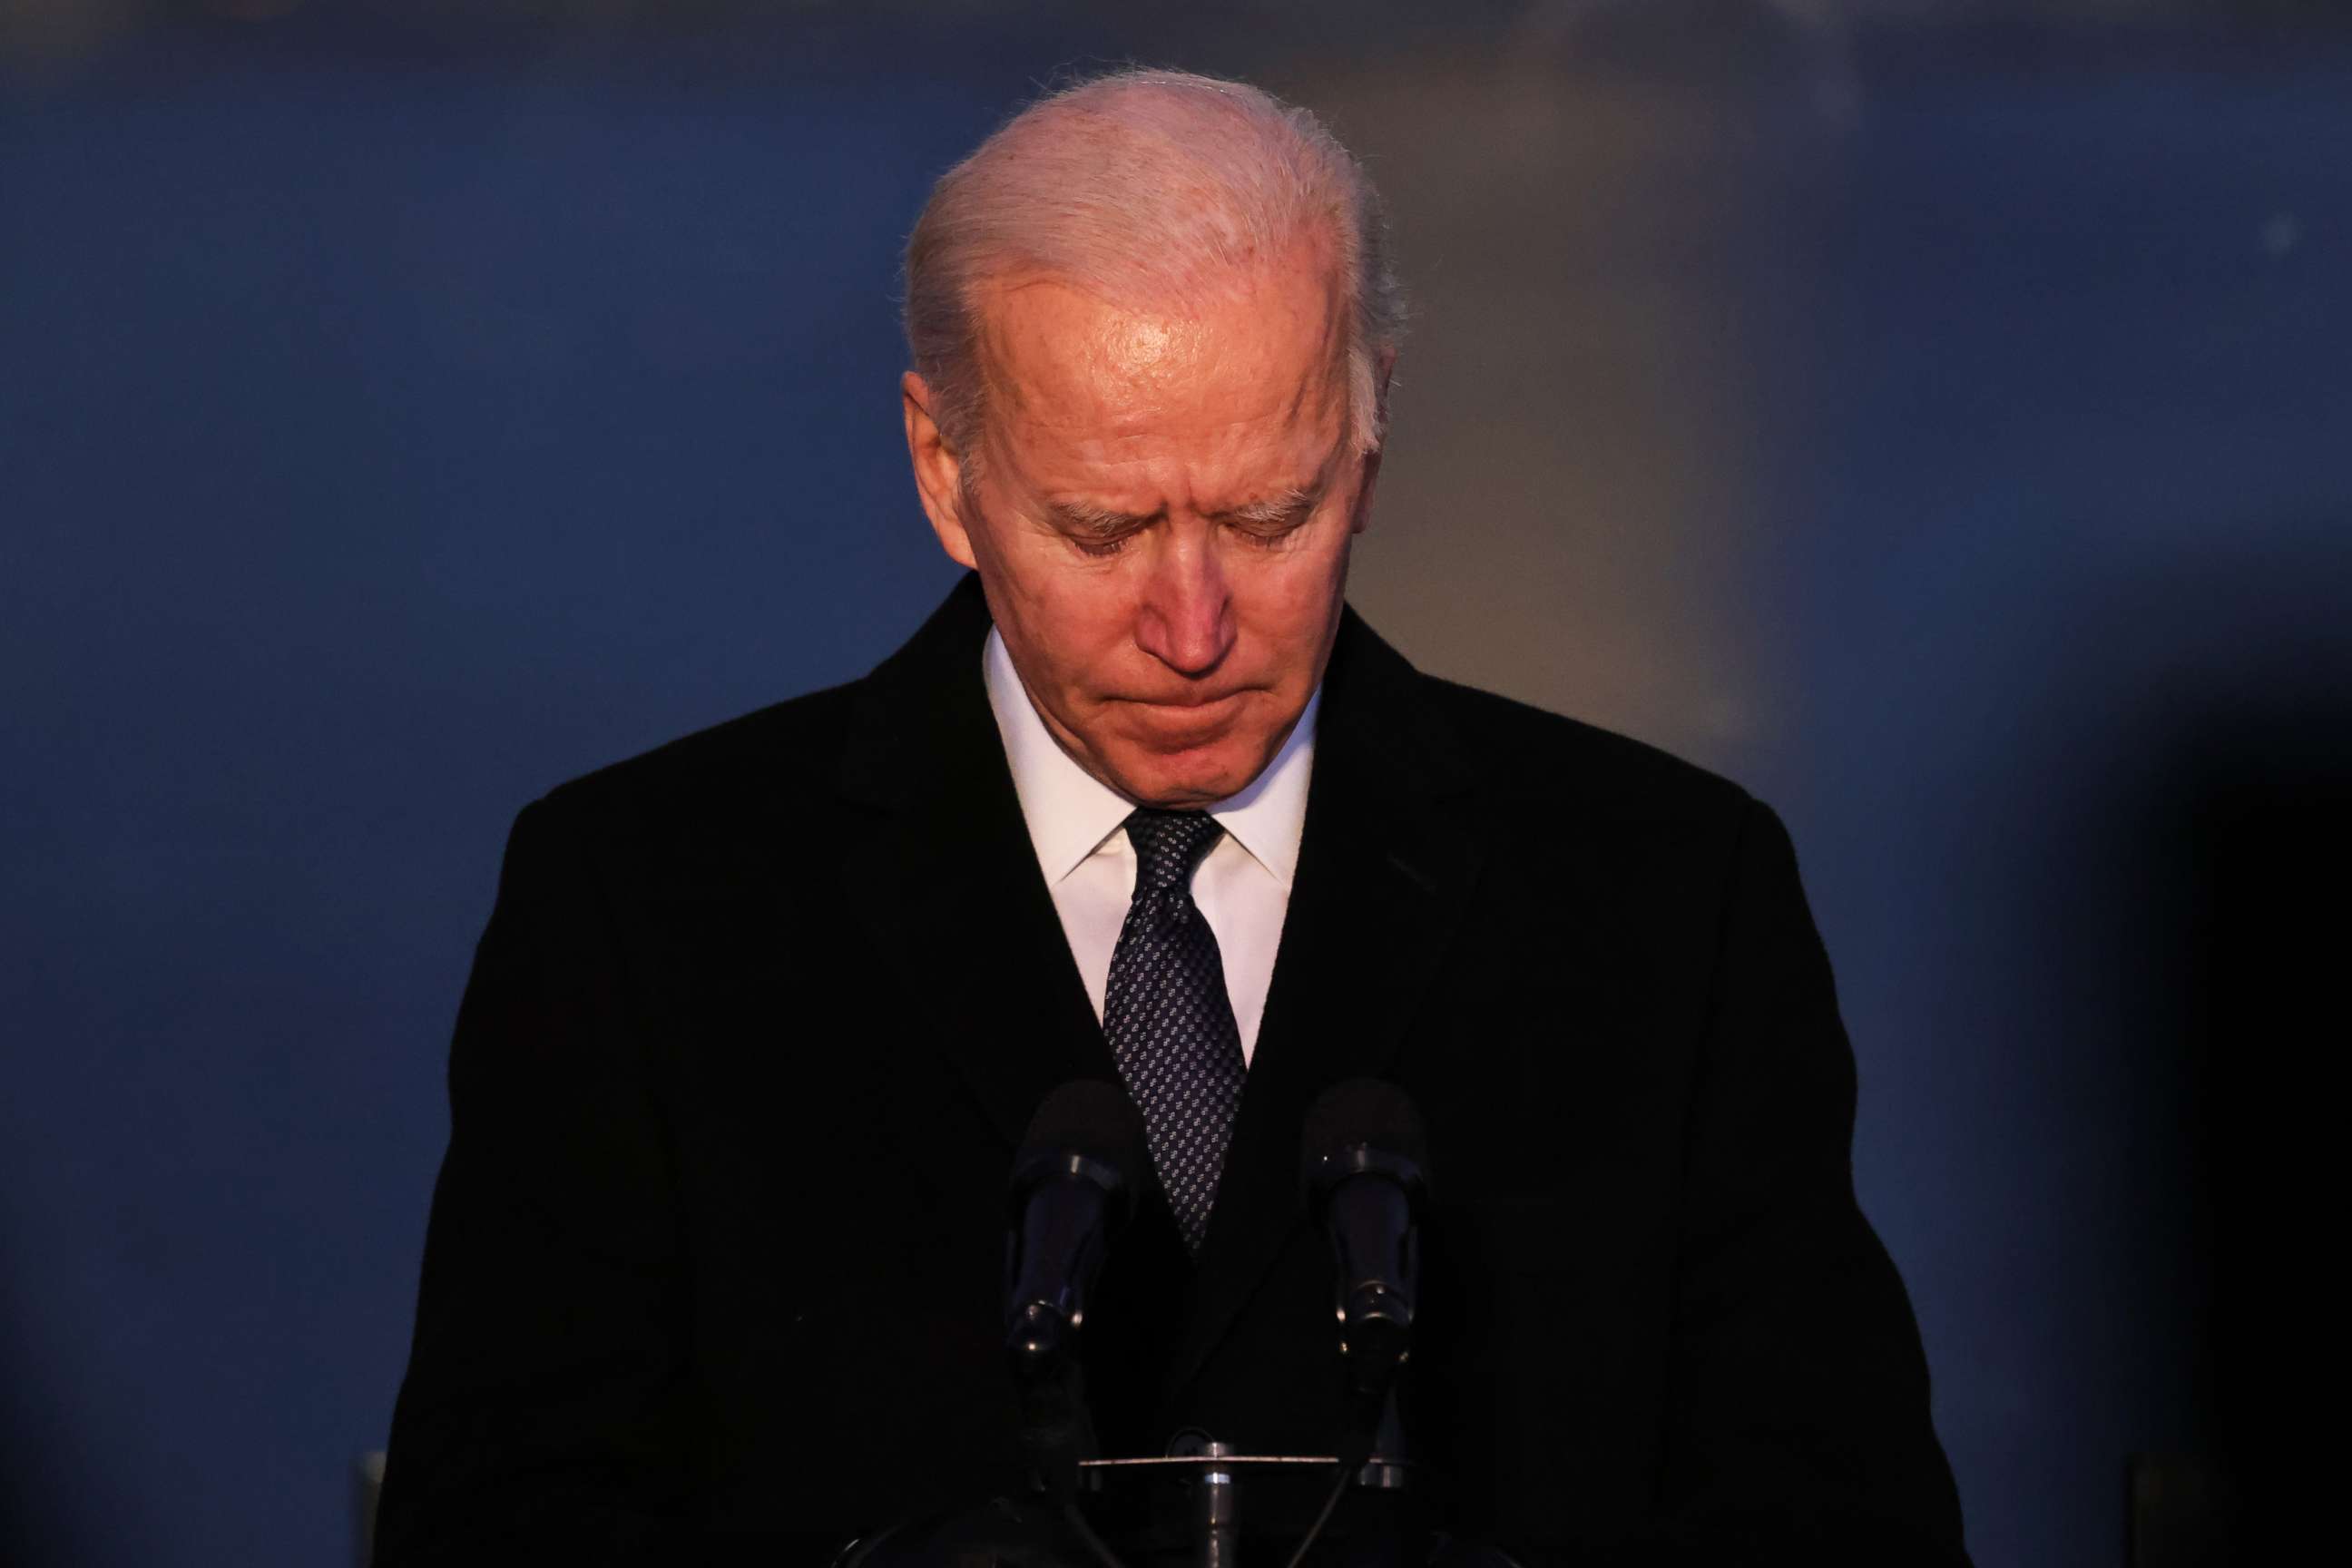 PHOTO: President-elect Joe Biden pauses as he speaks at a memorial for victims of the COVID-19 pandemic at the Lincoln Memorial on the eve of the presidential inauguration on Jan. 19, 2021, in Washington, D.C.